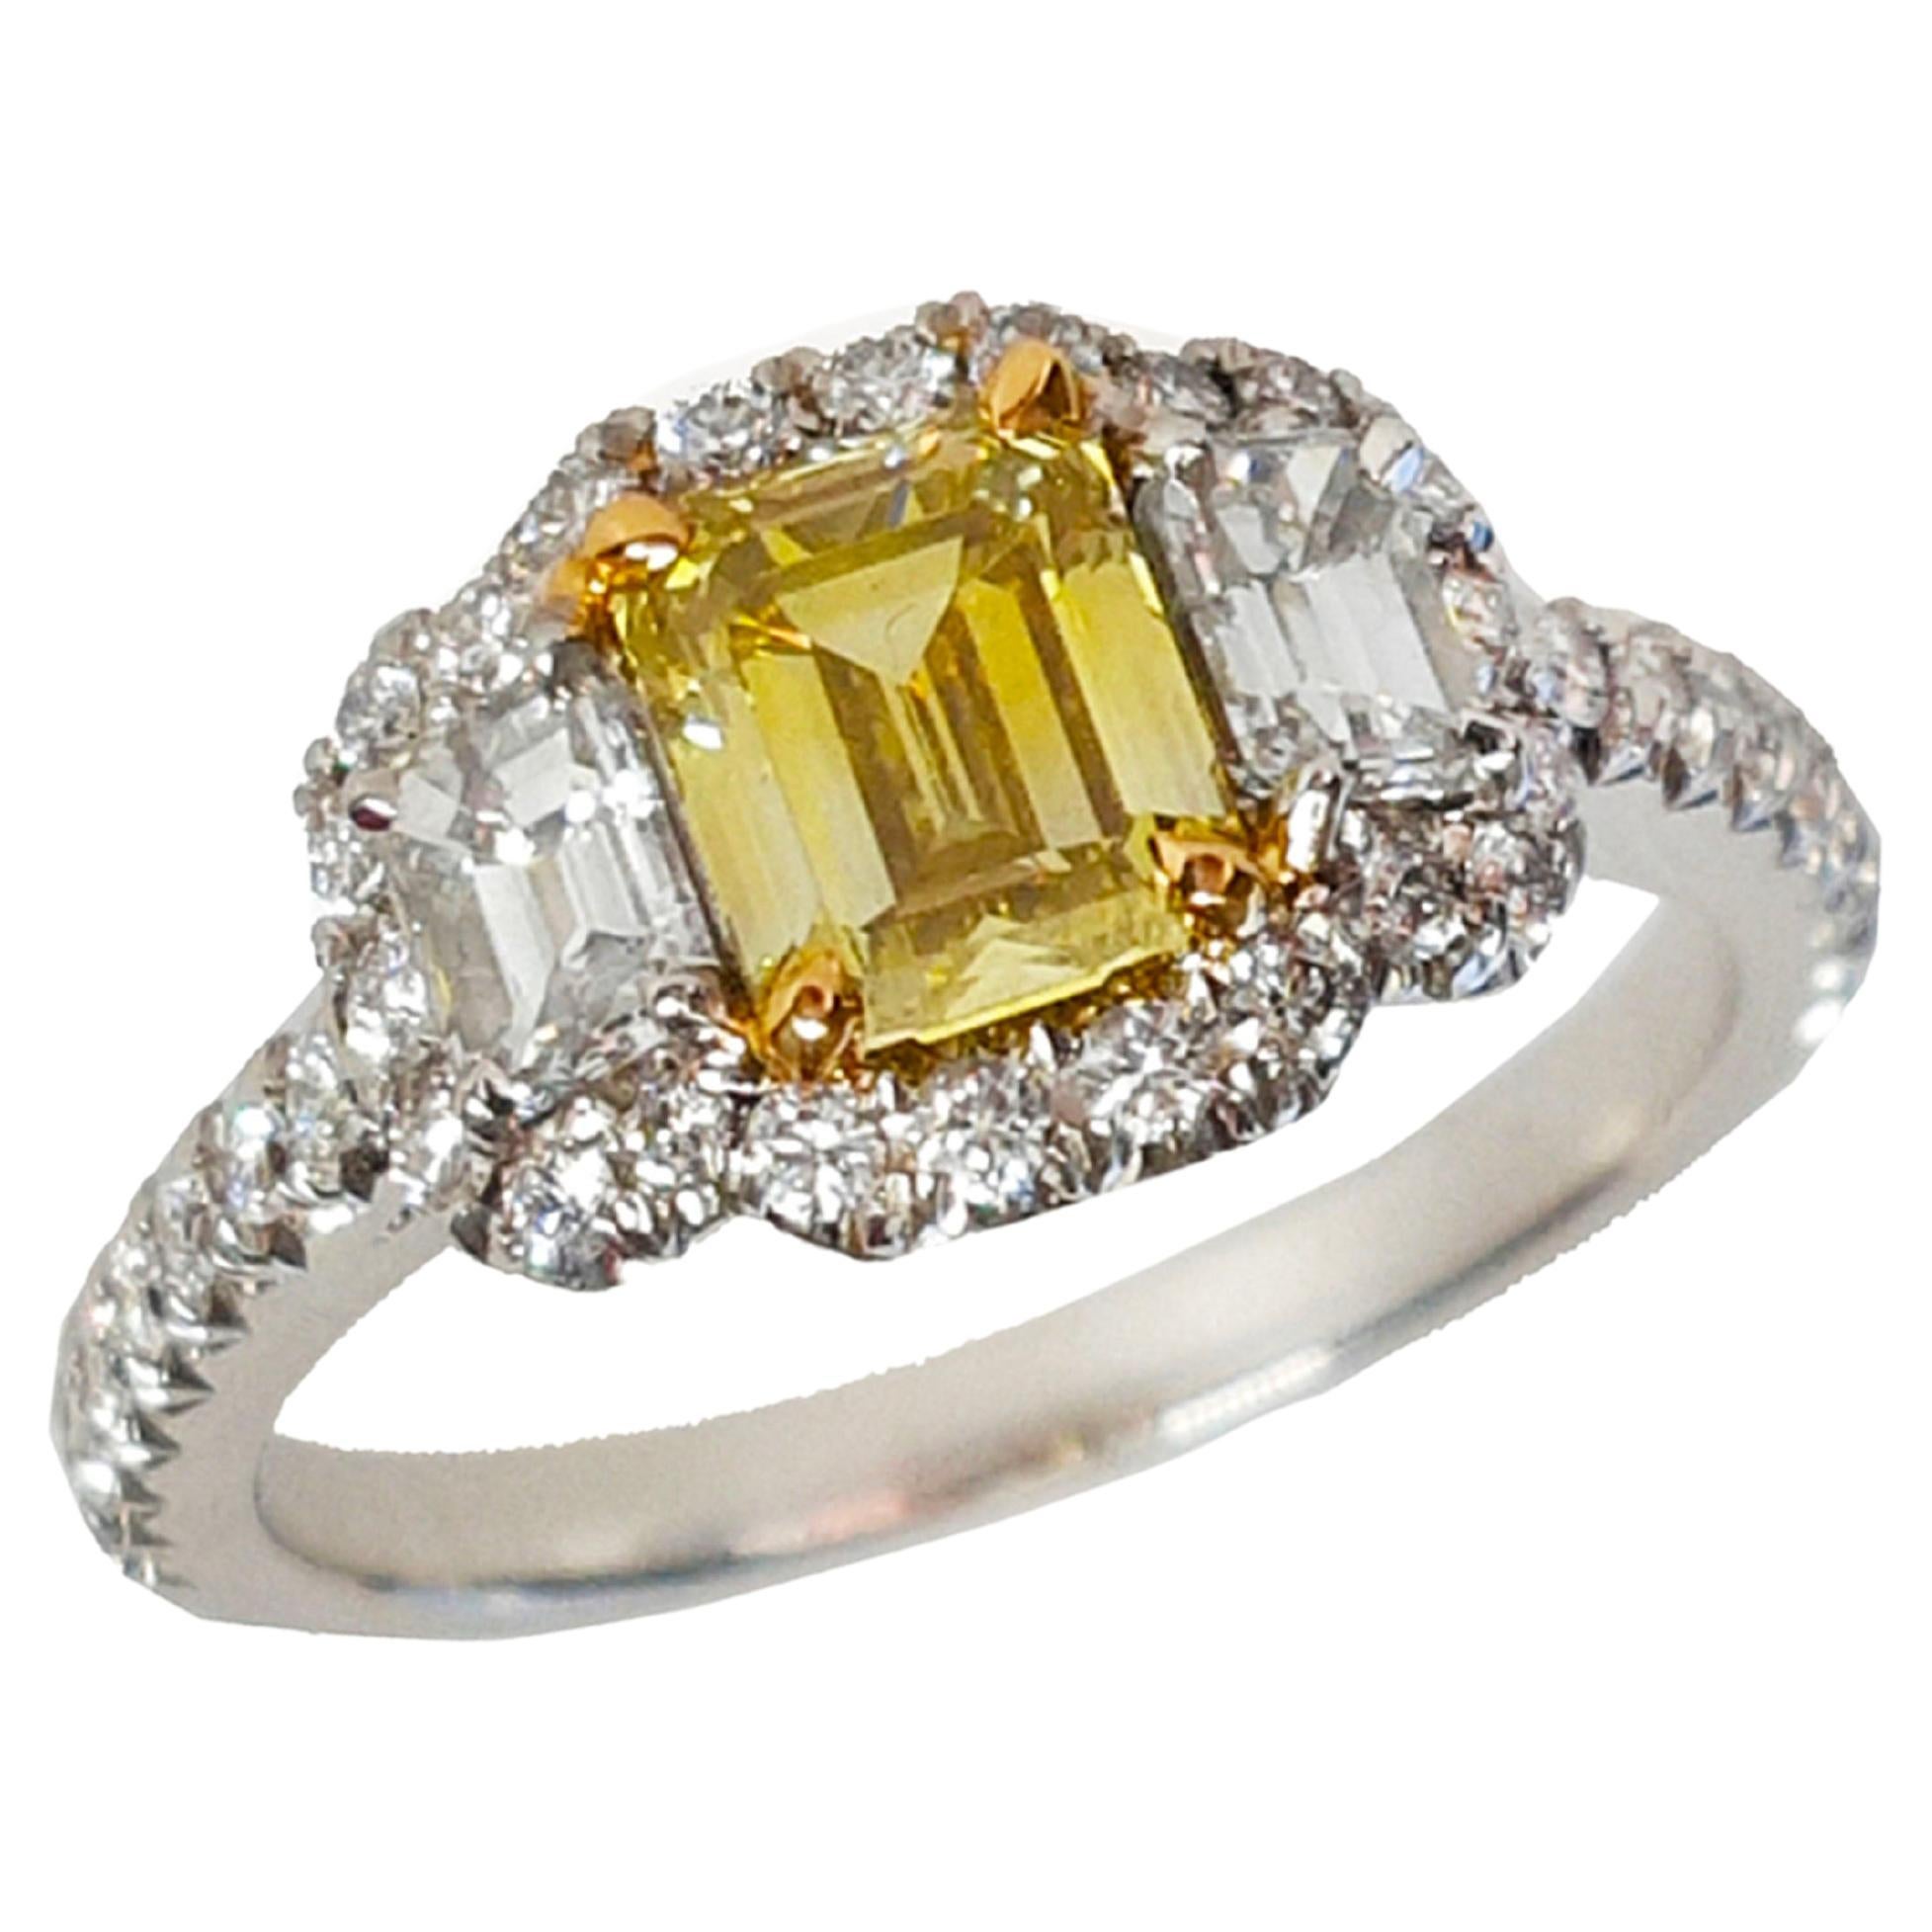 1 Carat Fancy Intense Yellow Diamond Engagement 3 Stones Ring, GIA Certified For Sale